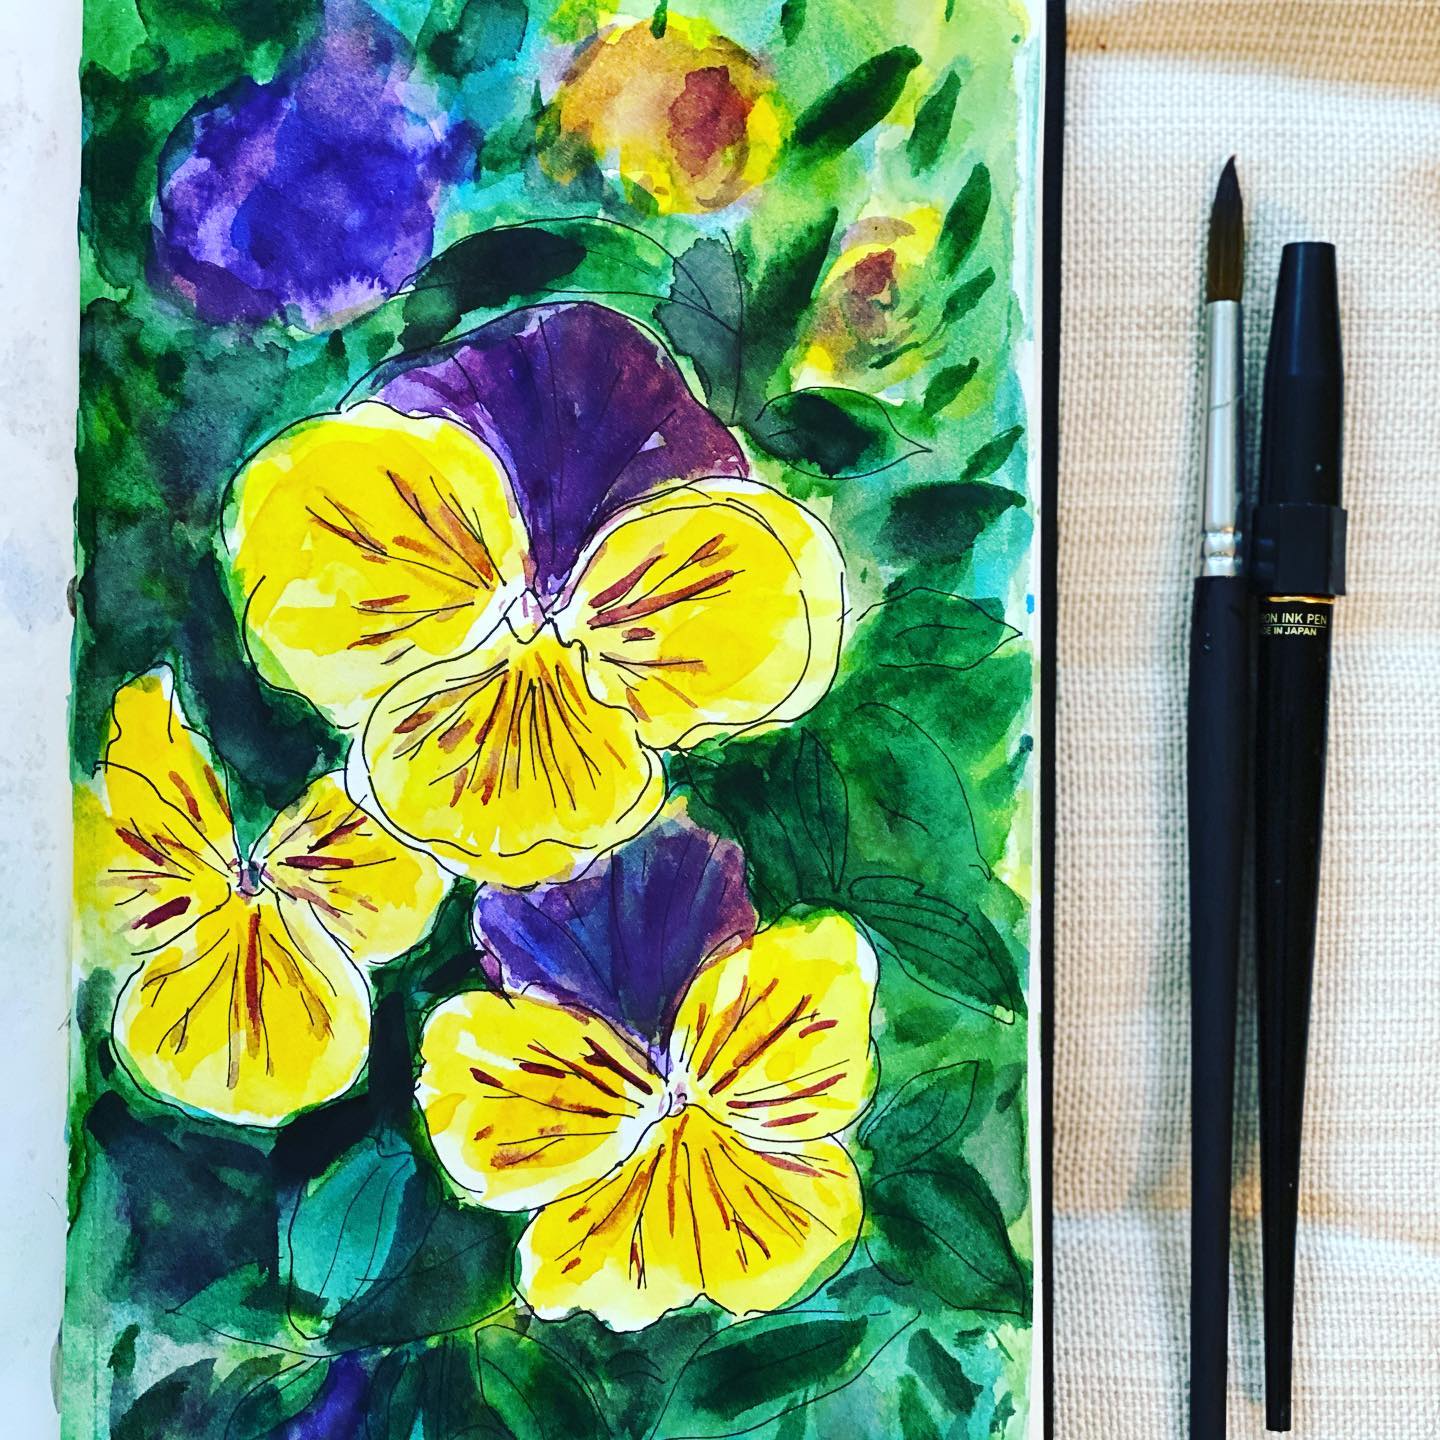 One of the most resilient and tough plants! These beautiful pansies are a prized possession of every garden.